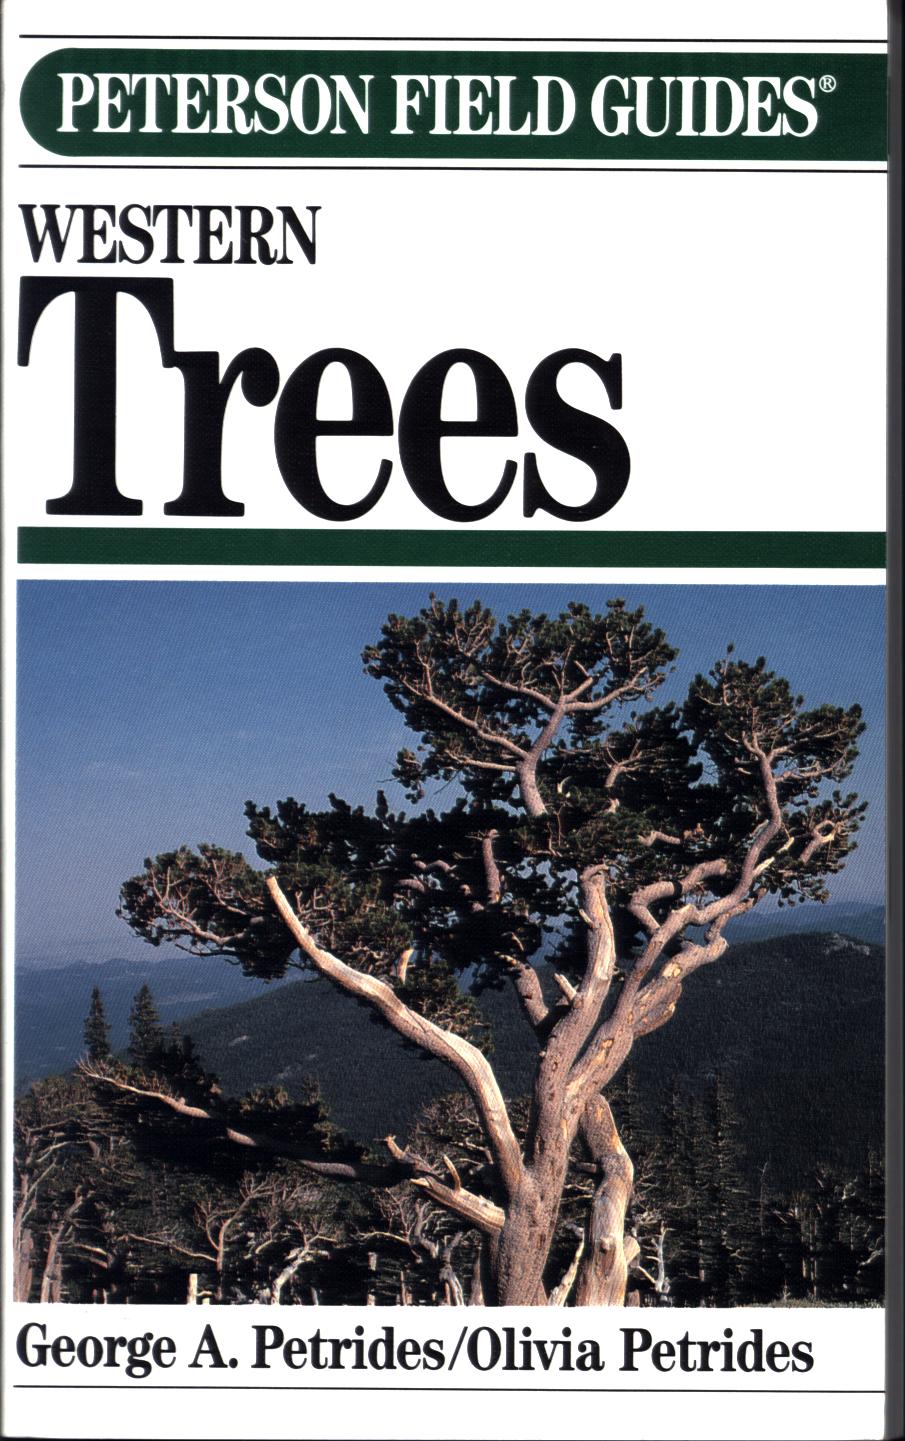 WESTERN TREES. by George A. Petrides & Olivia Petrides.